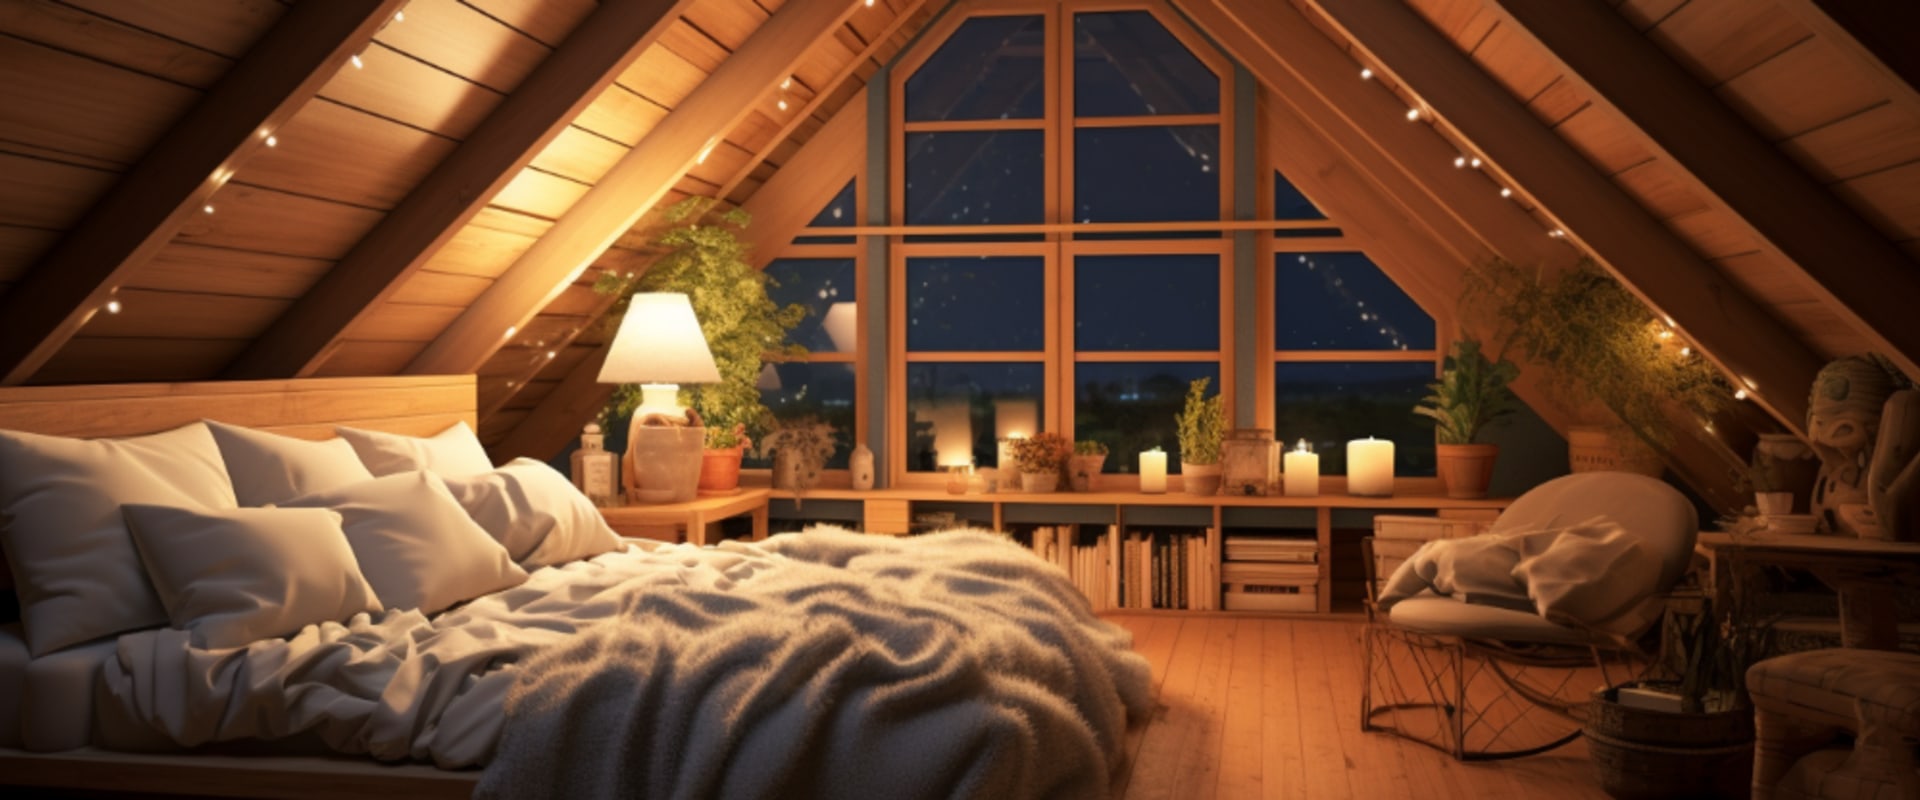 Boost Energy Efficiency With Top Attic Insulation Installation Contractors in Key Biscayne FL